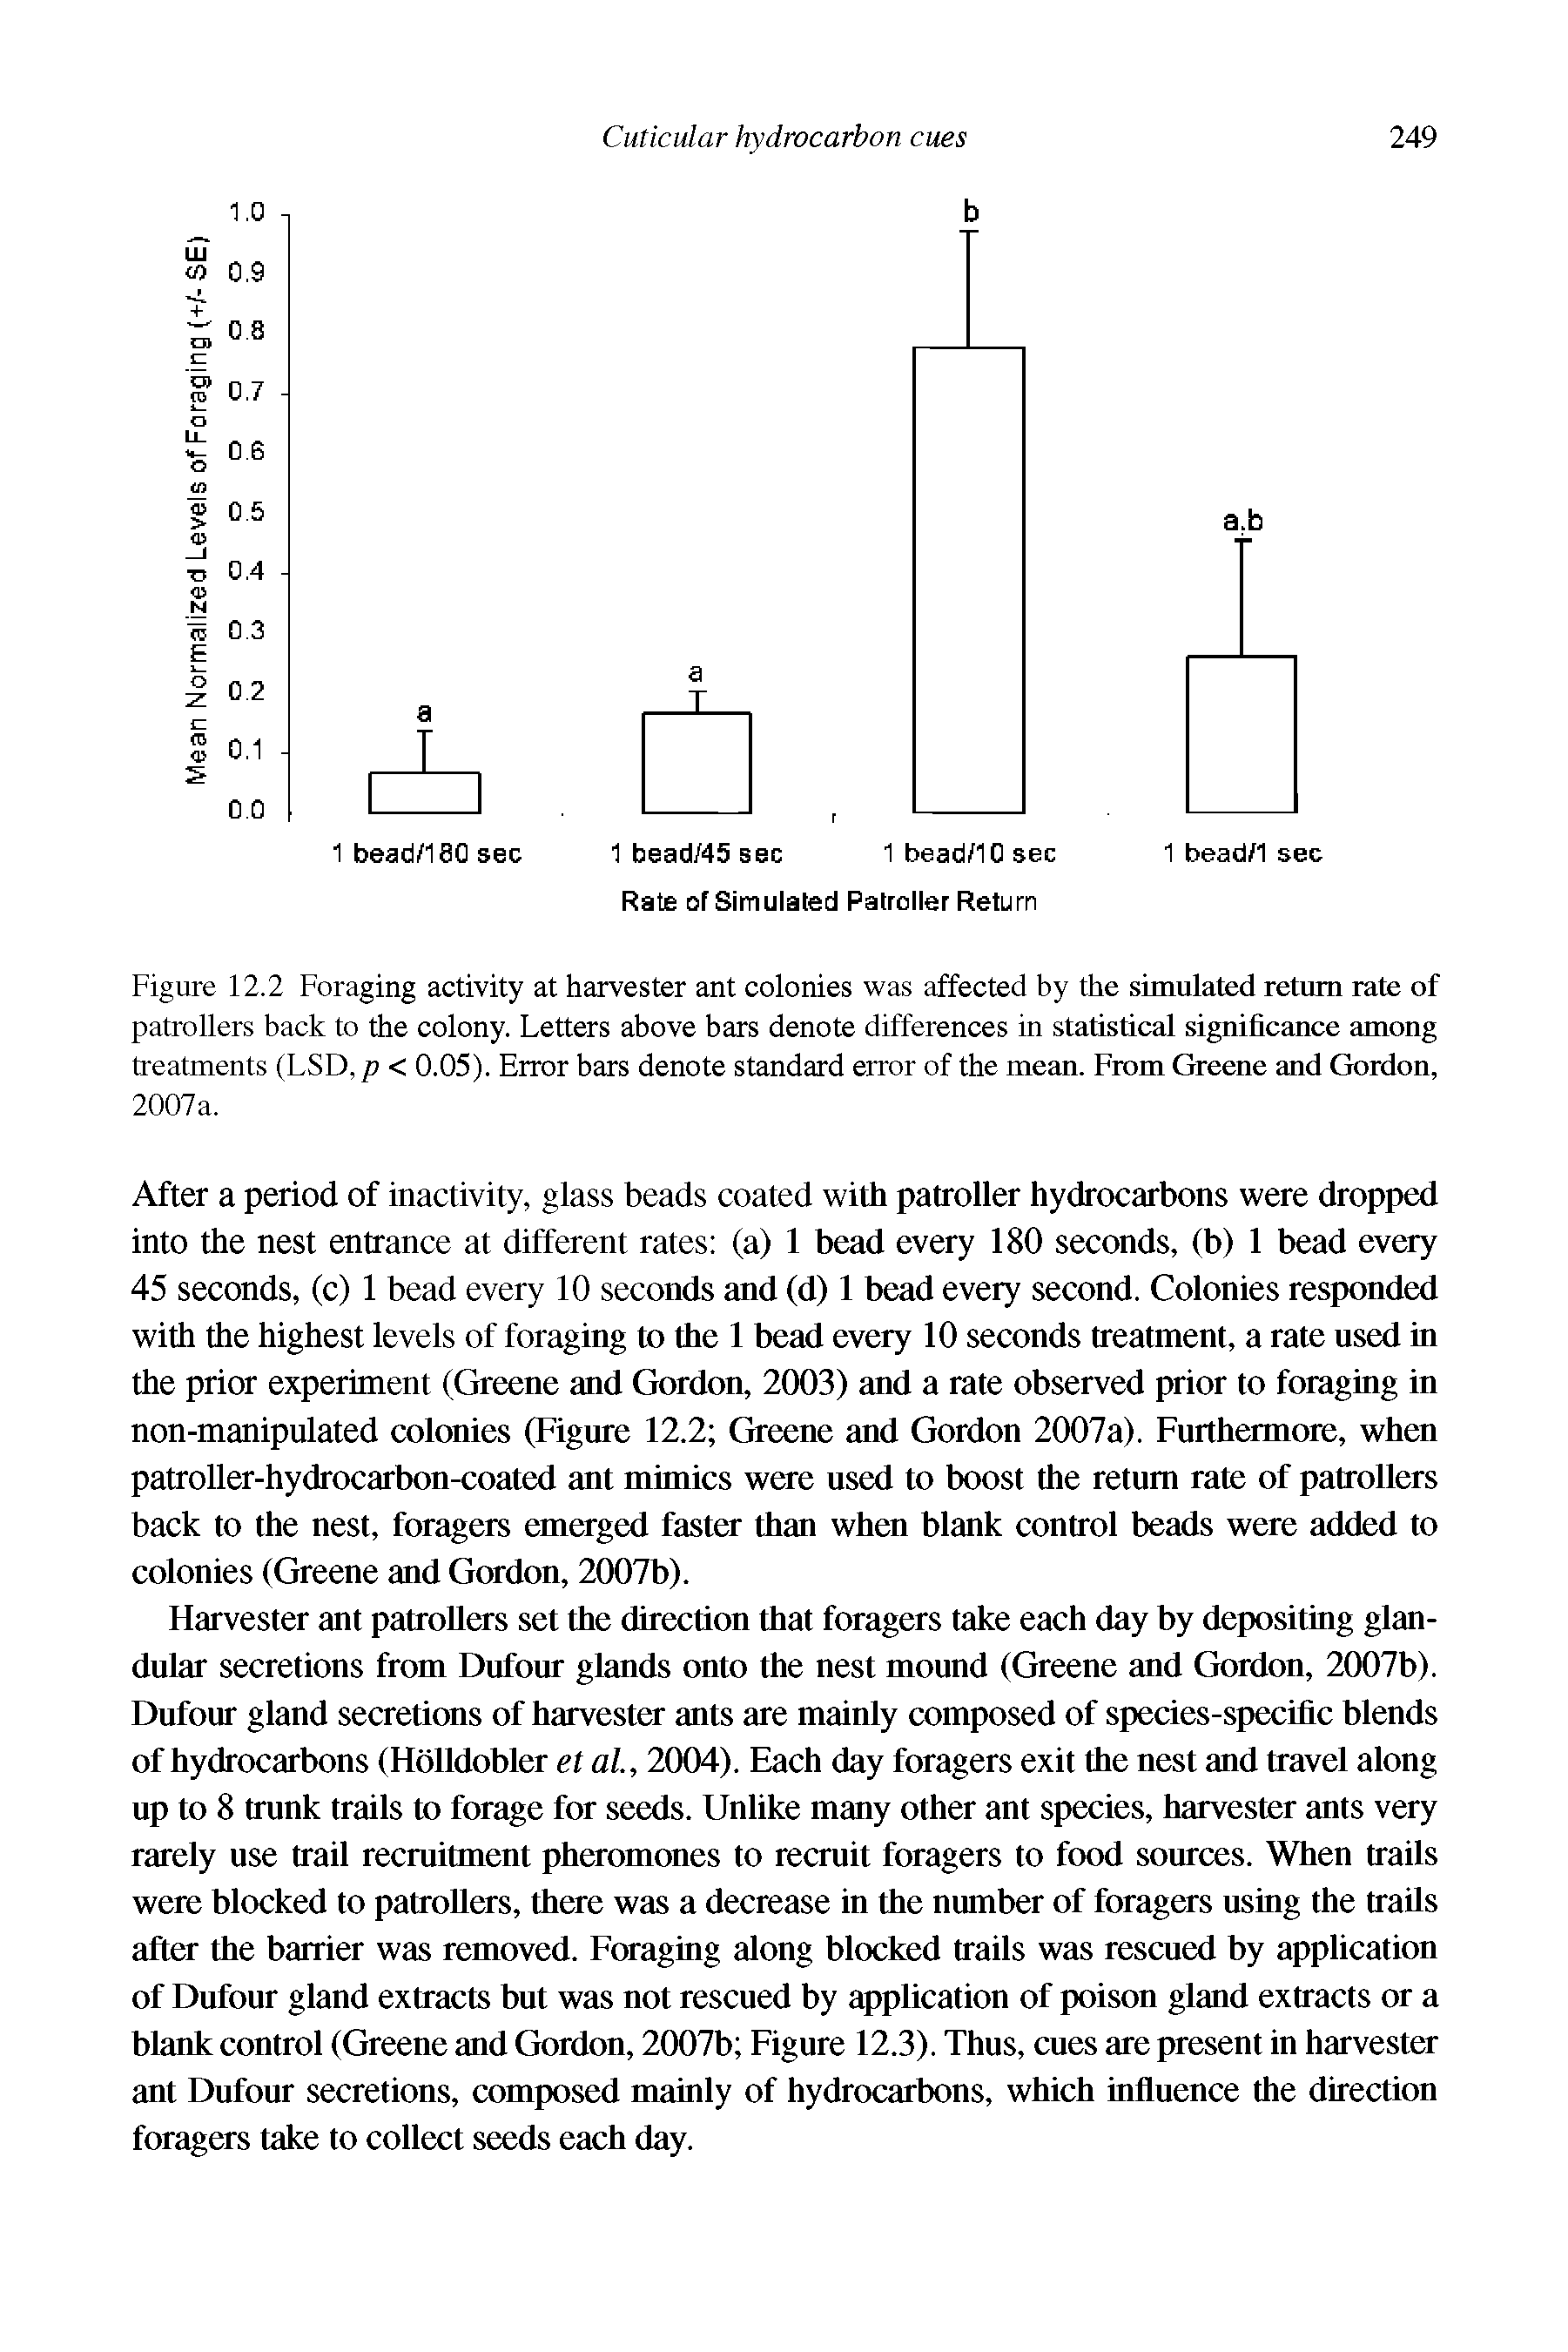 Figure 12.2 Foraging activity at harvester ant colonies was affected by the simulated return rate of patrollers back to the colony. Letters above bars denote differences in statistical significance among treatments (LSD, p < 0.05). Error bars denote standard error of the mean. From Greene and Gordon, 2007a.